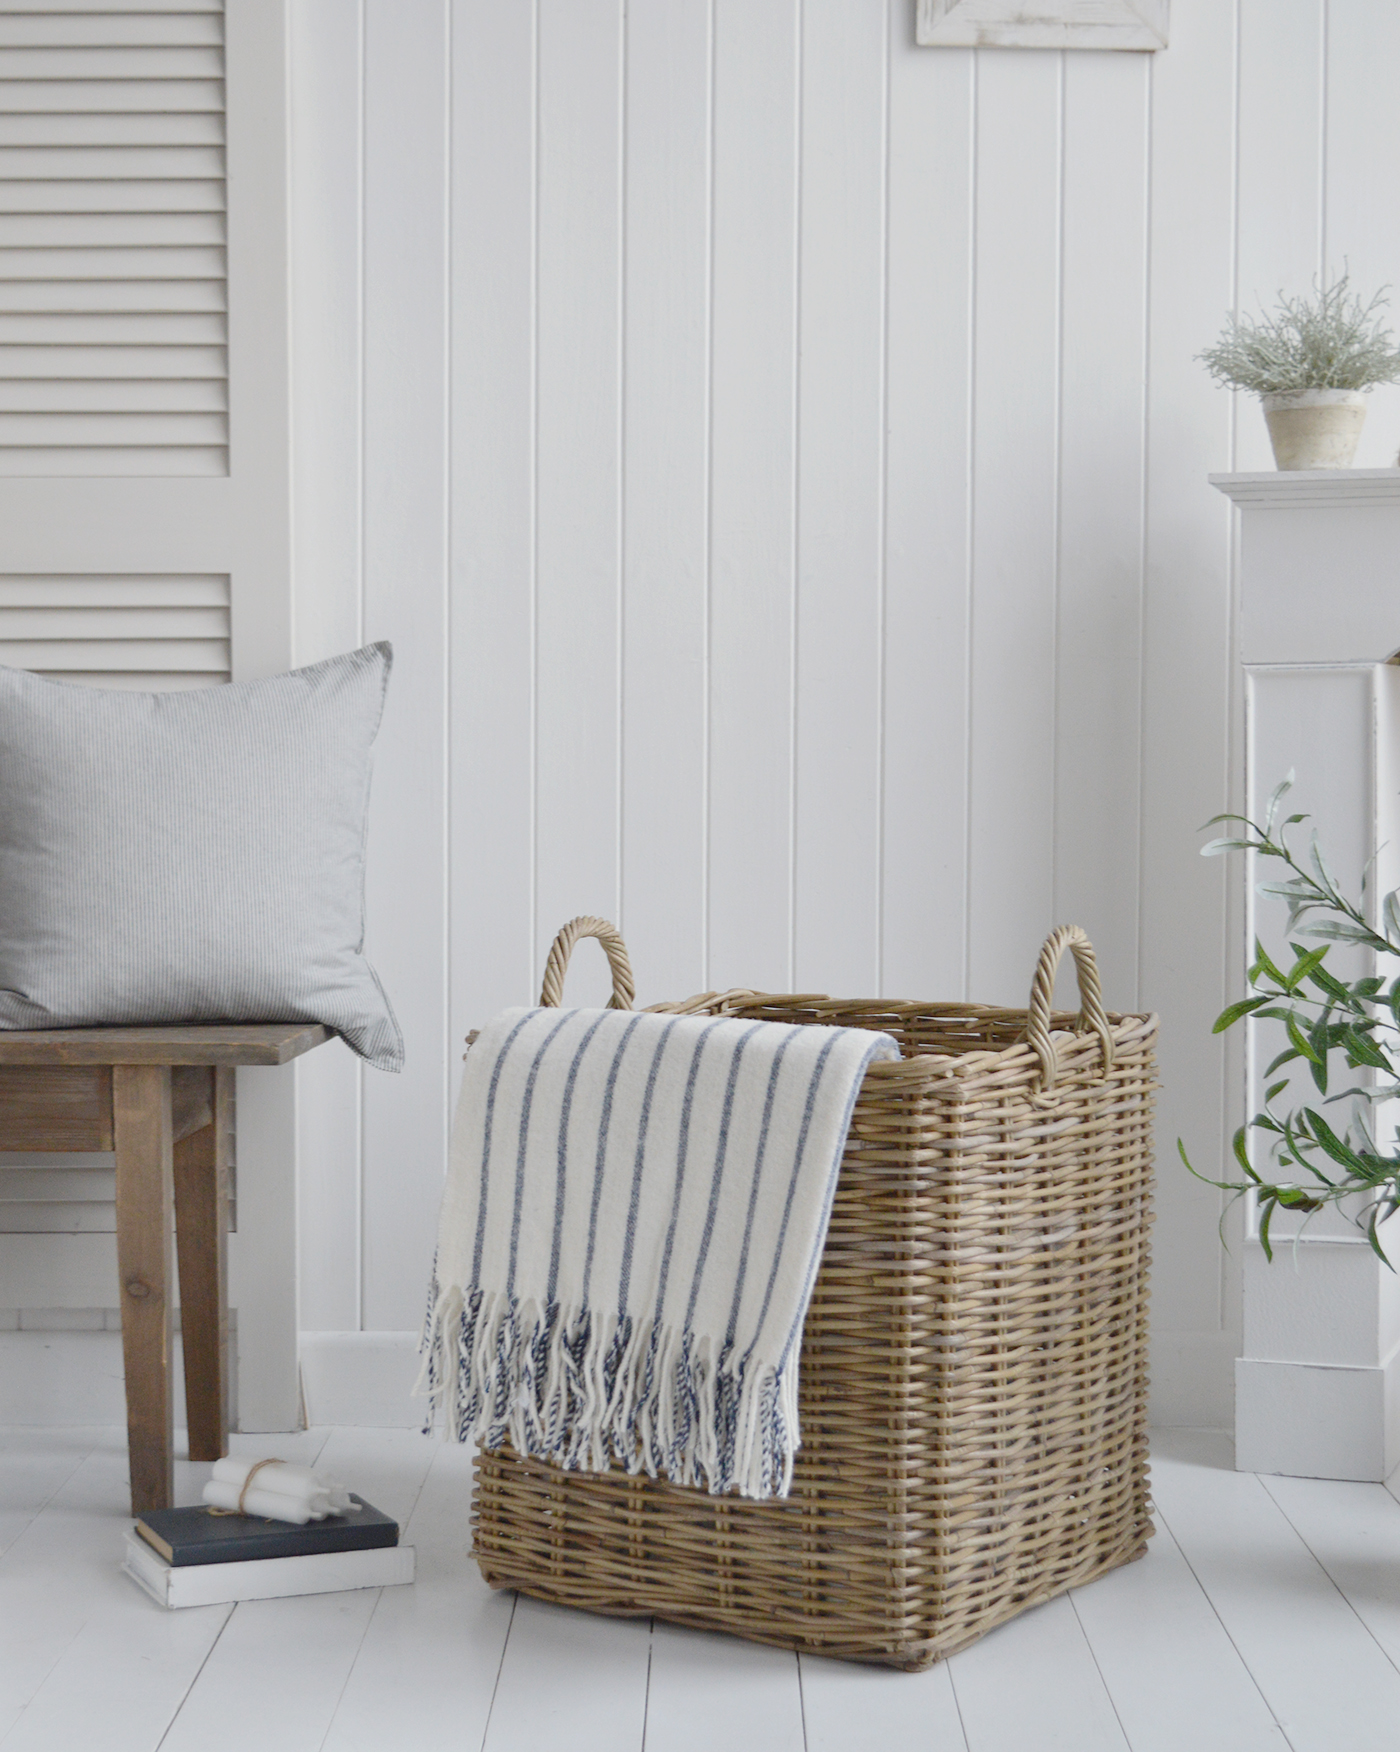 Large baskets - Casco bay grey rattan log basket with handles. Shown here with the Sudbury wool throw in blue and white